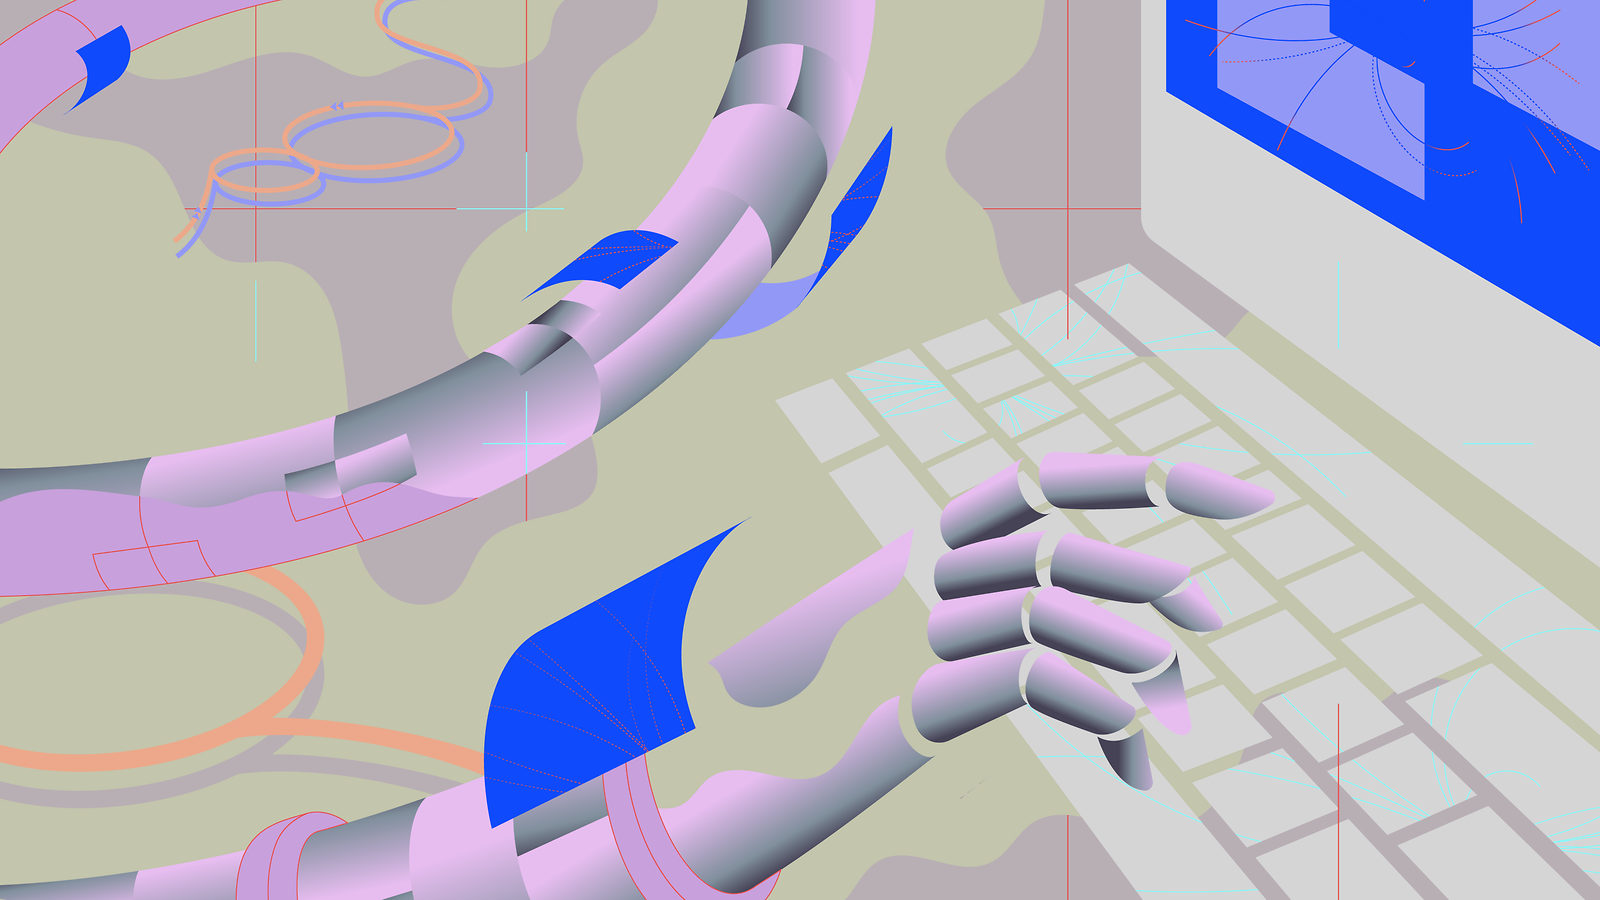 An illustration of robot hands typing on a computer